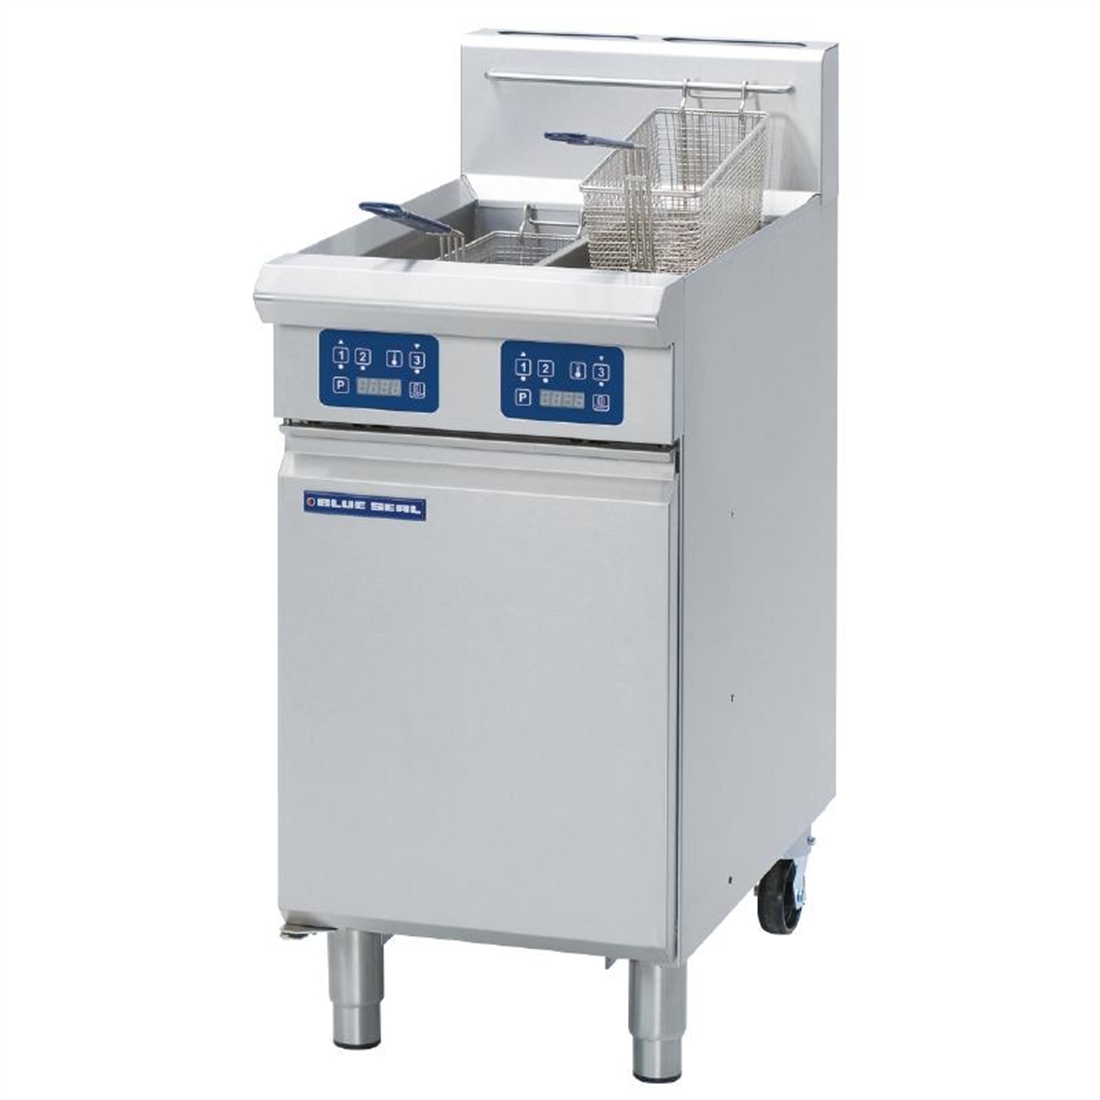 Blue Seal Evolution Vee Ray Twin Tank Fryer with Elec Controls LPG450mm GT46E/L